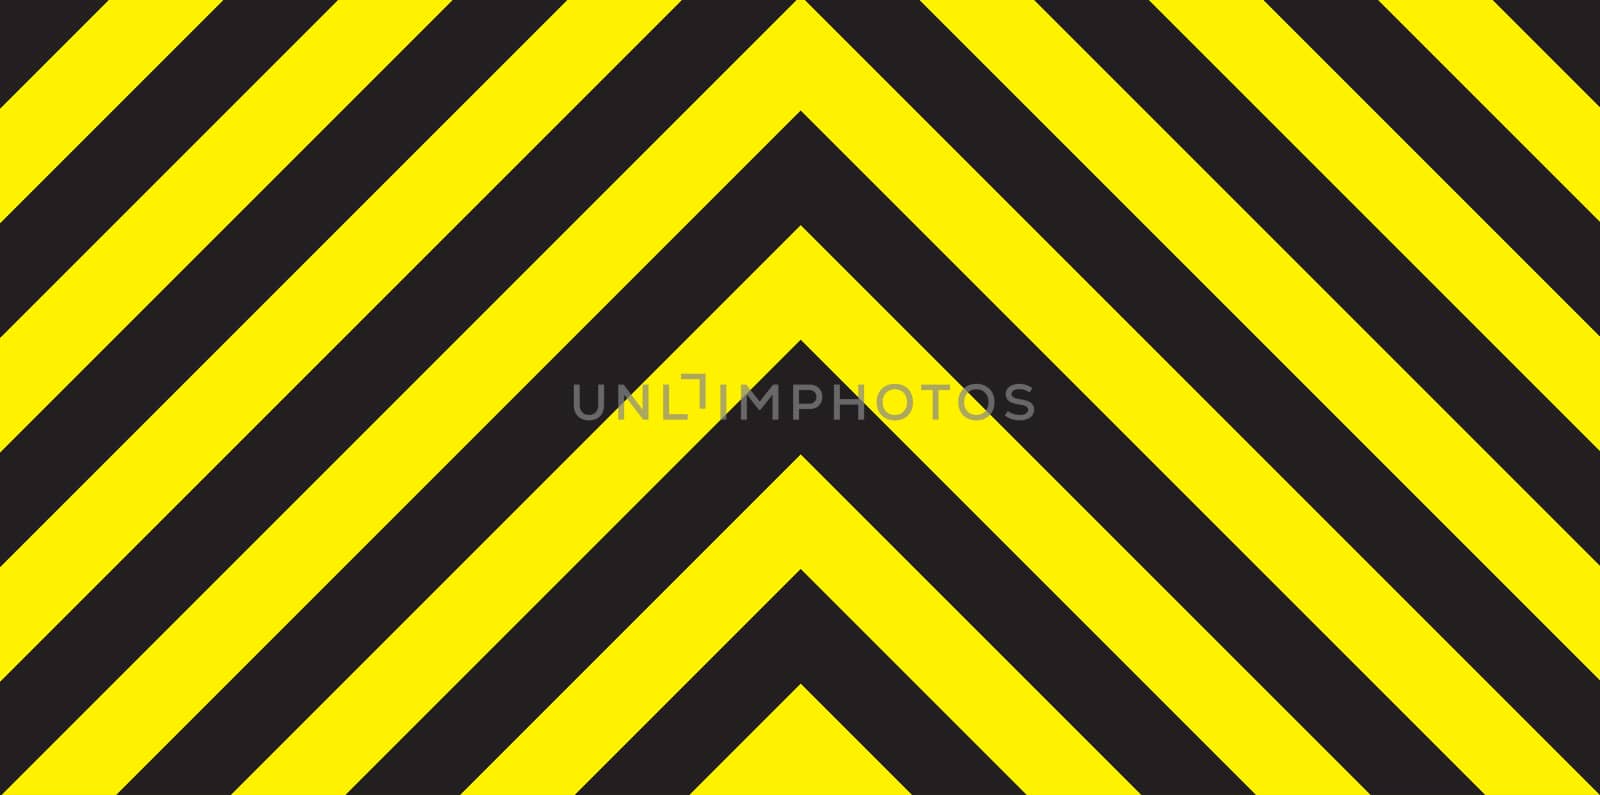 A black and yellow warning chevron vehicle background